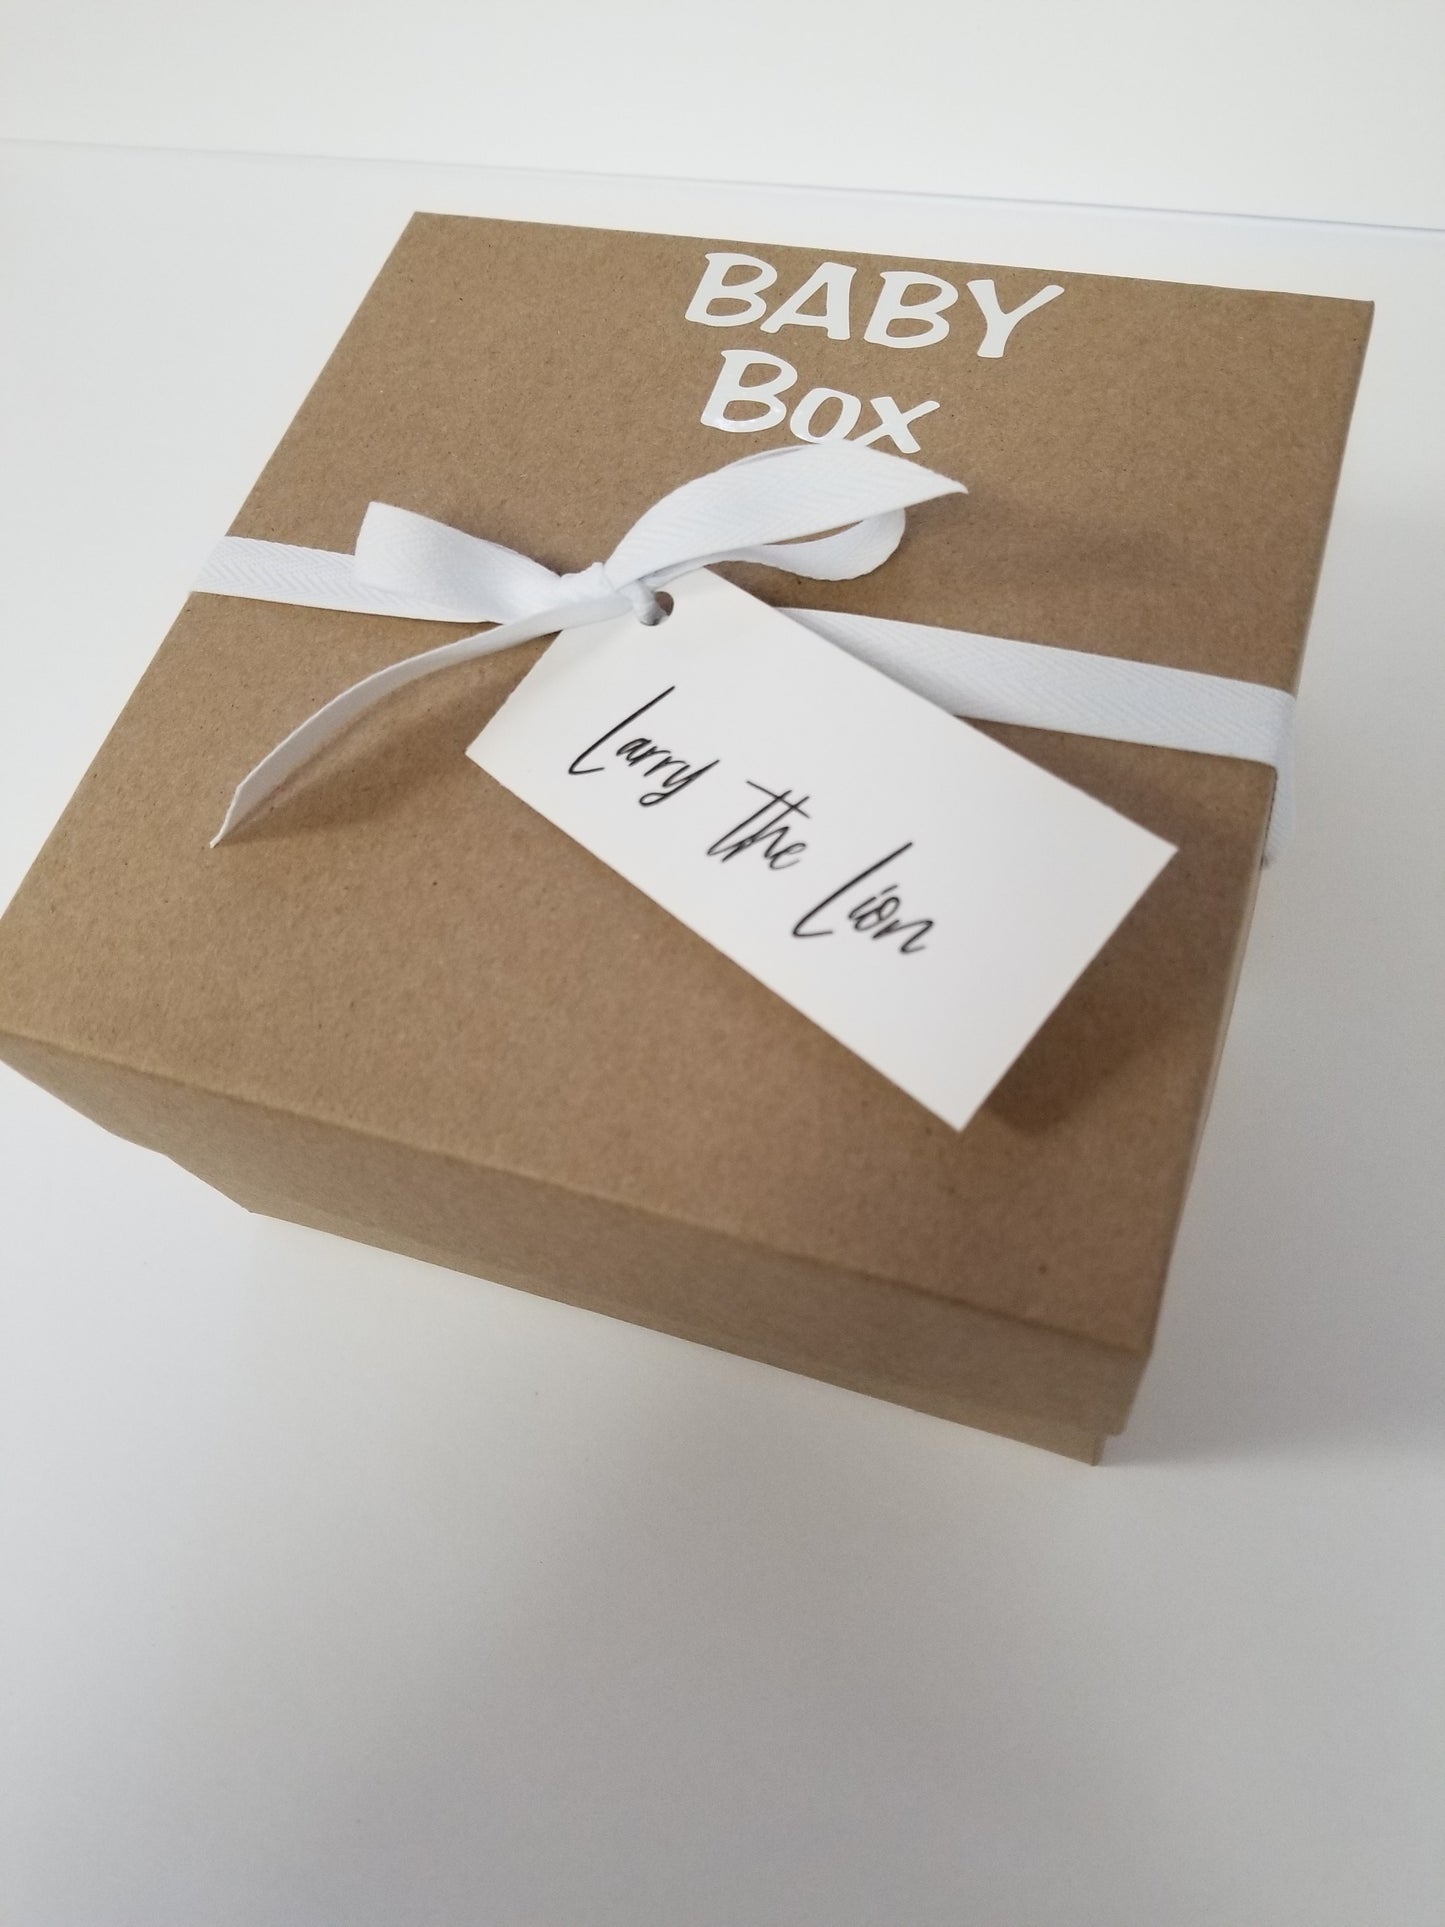 Larry the Lion Baby Box